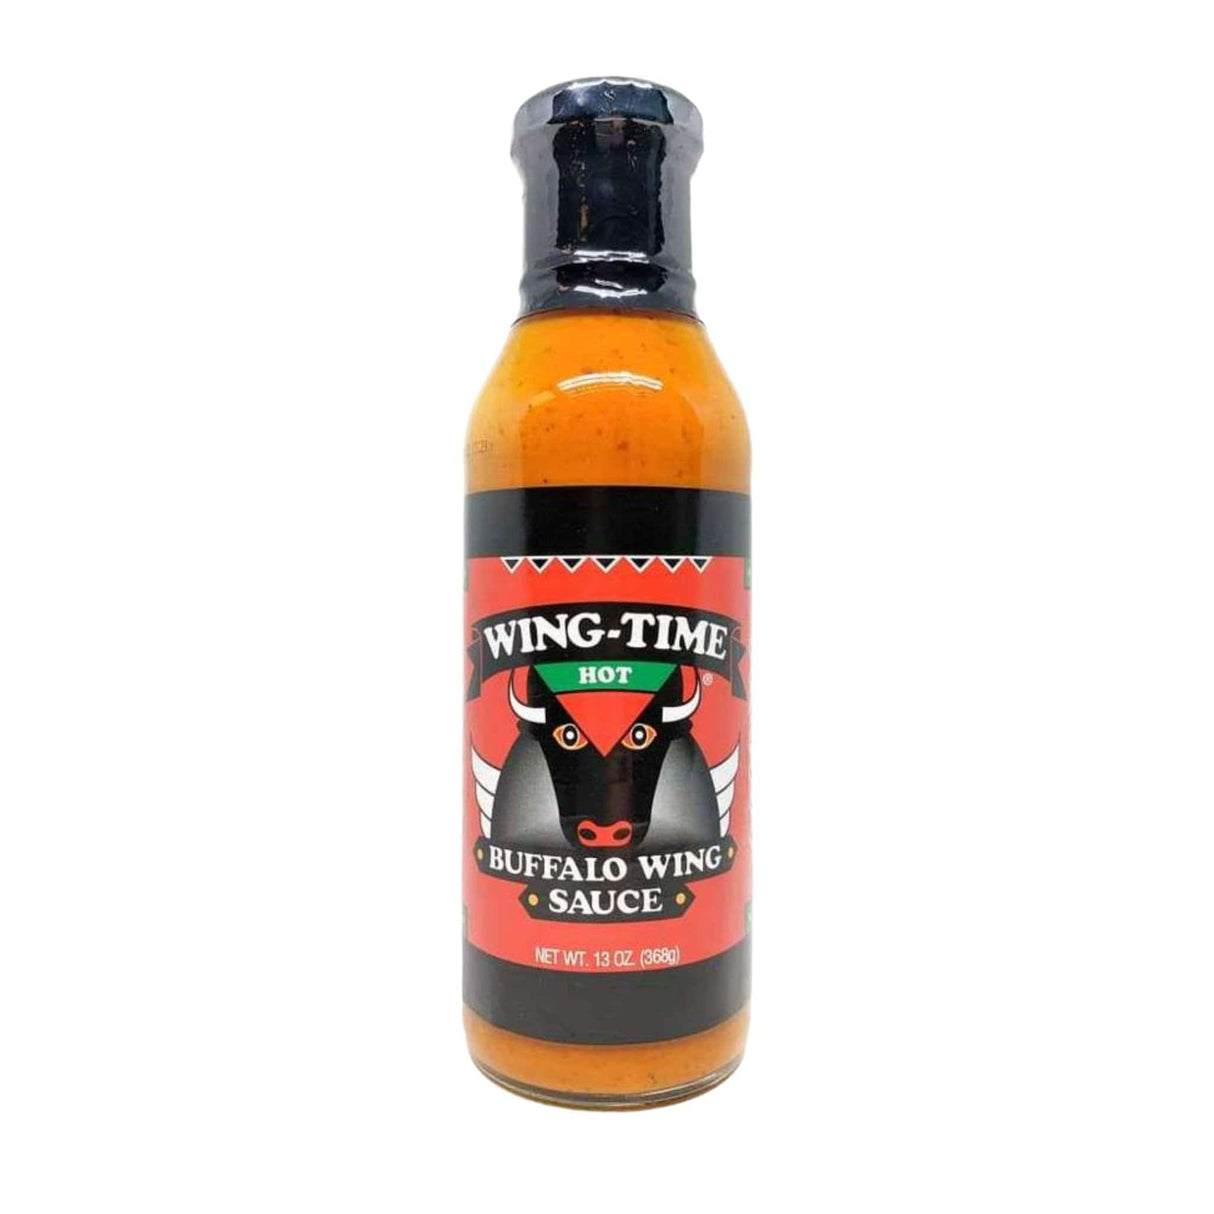 Wing-Time Hot Buffalo Wing Sauce - hot sauce market & more